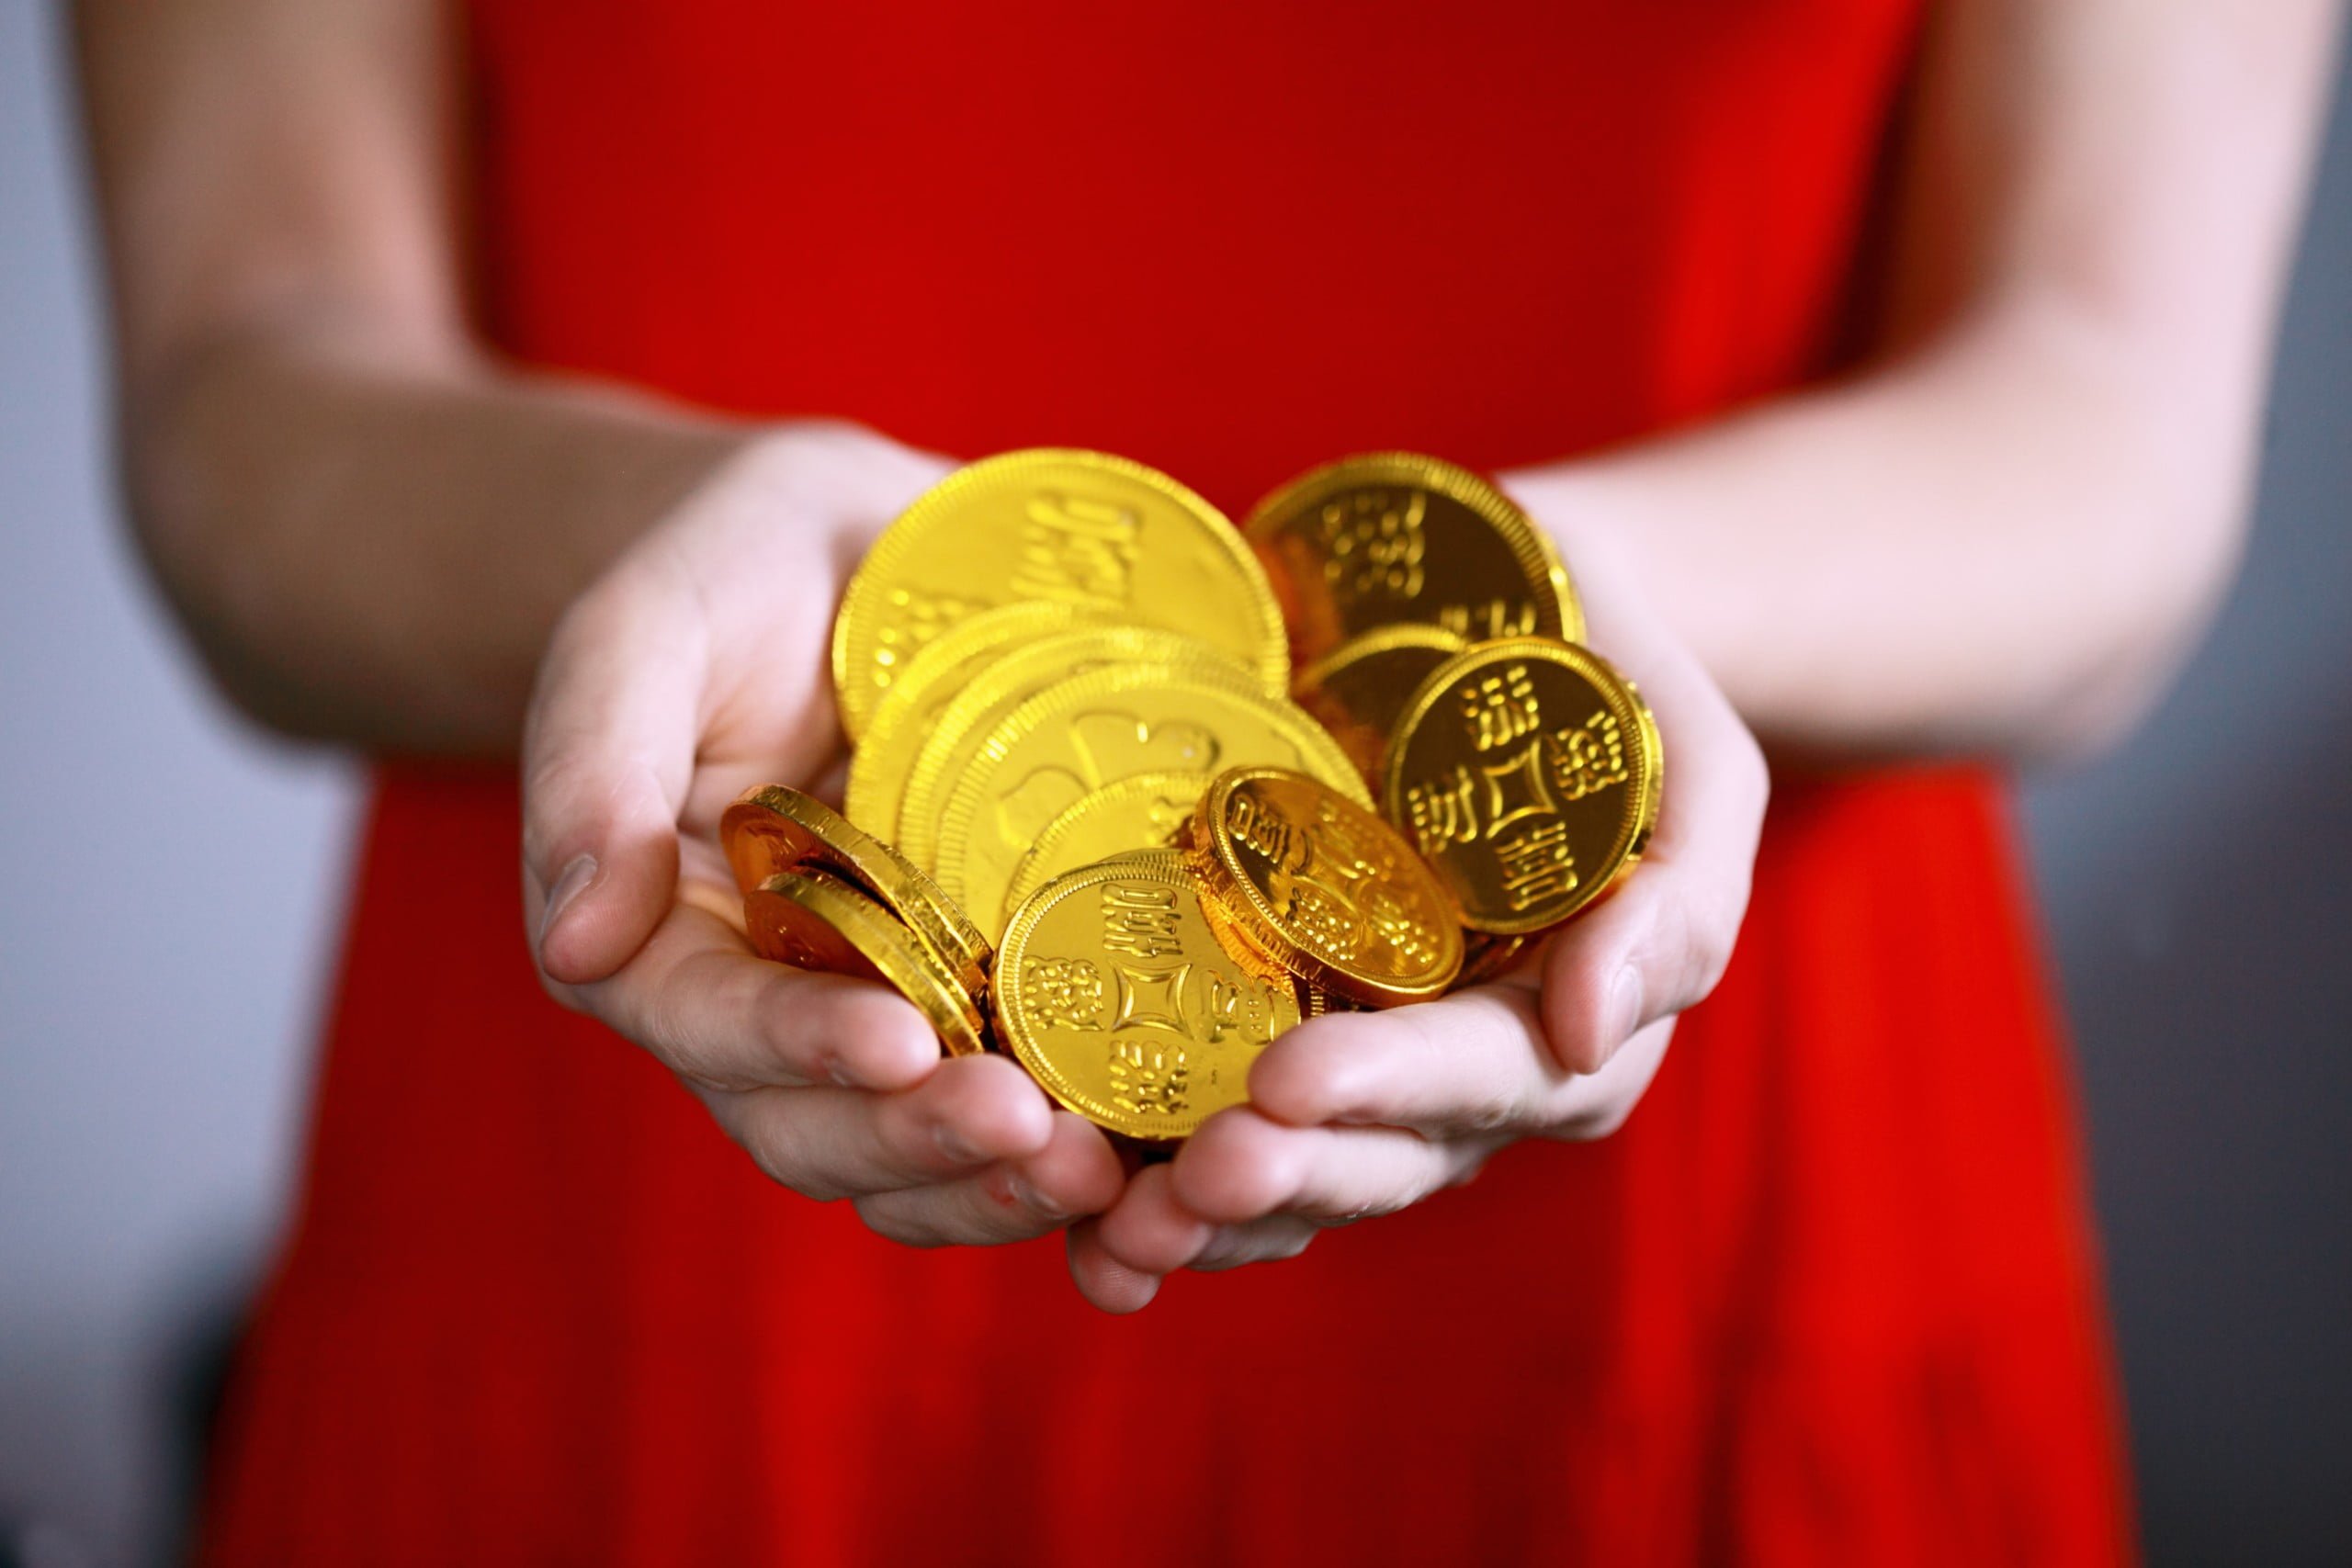 These bright and pretty golden coins are foil covered chocolate candies.